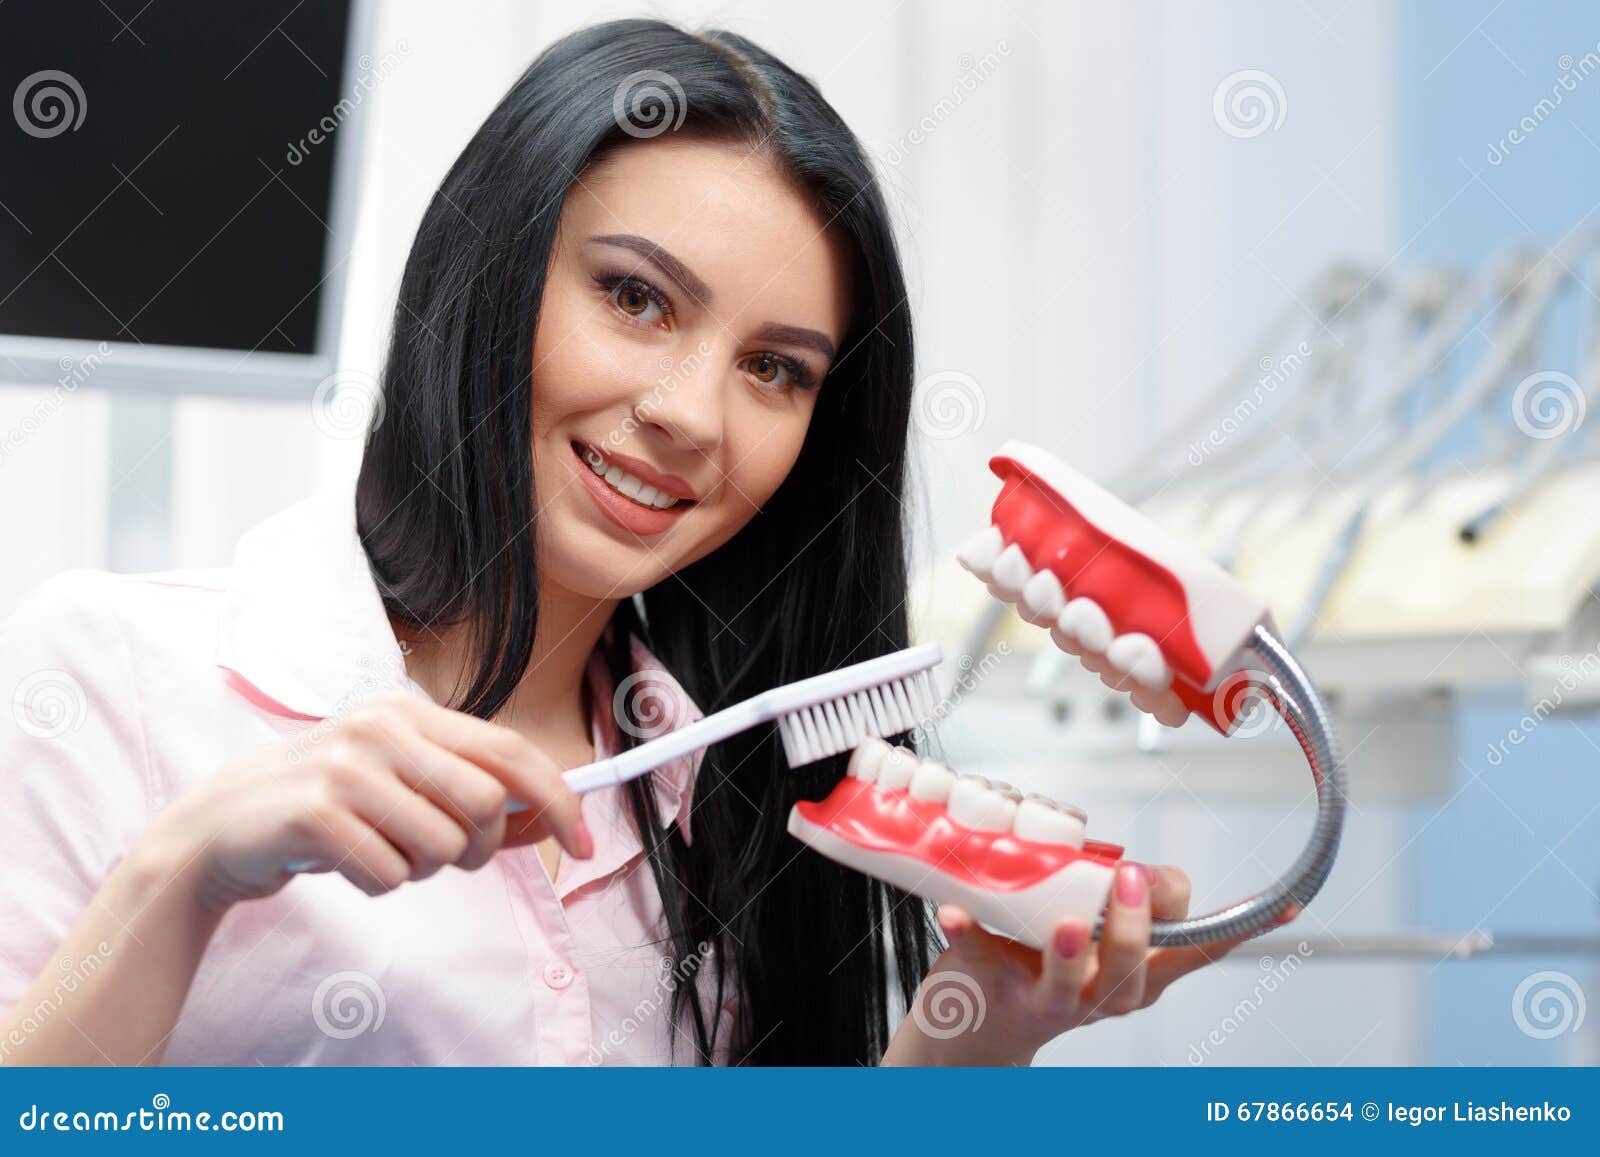 Stomatology and health care concept. Beautiful young woman explains to dentures how to properly care for your teeth